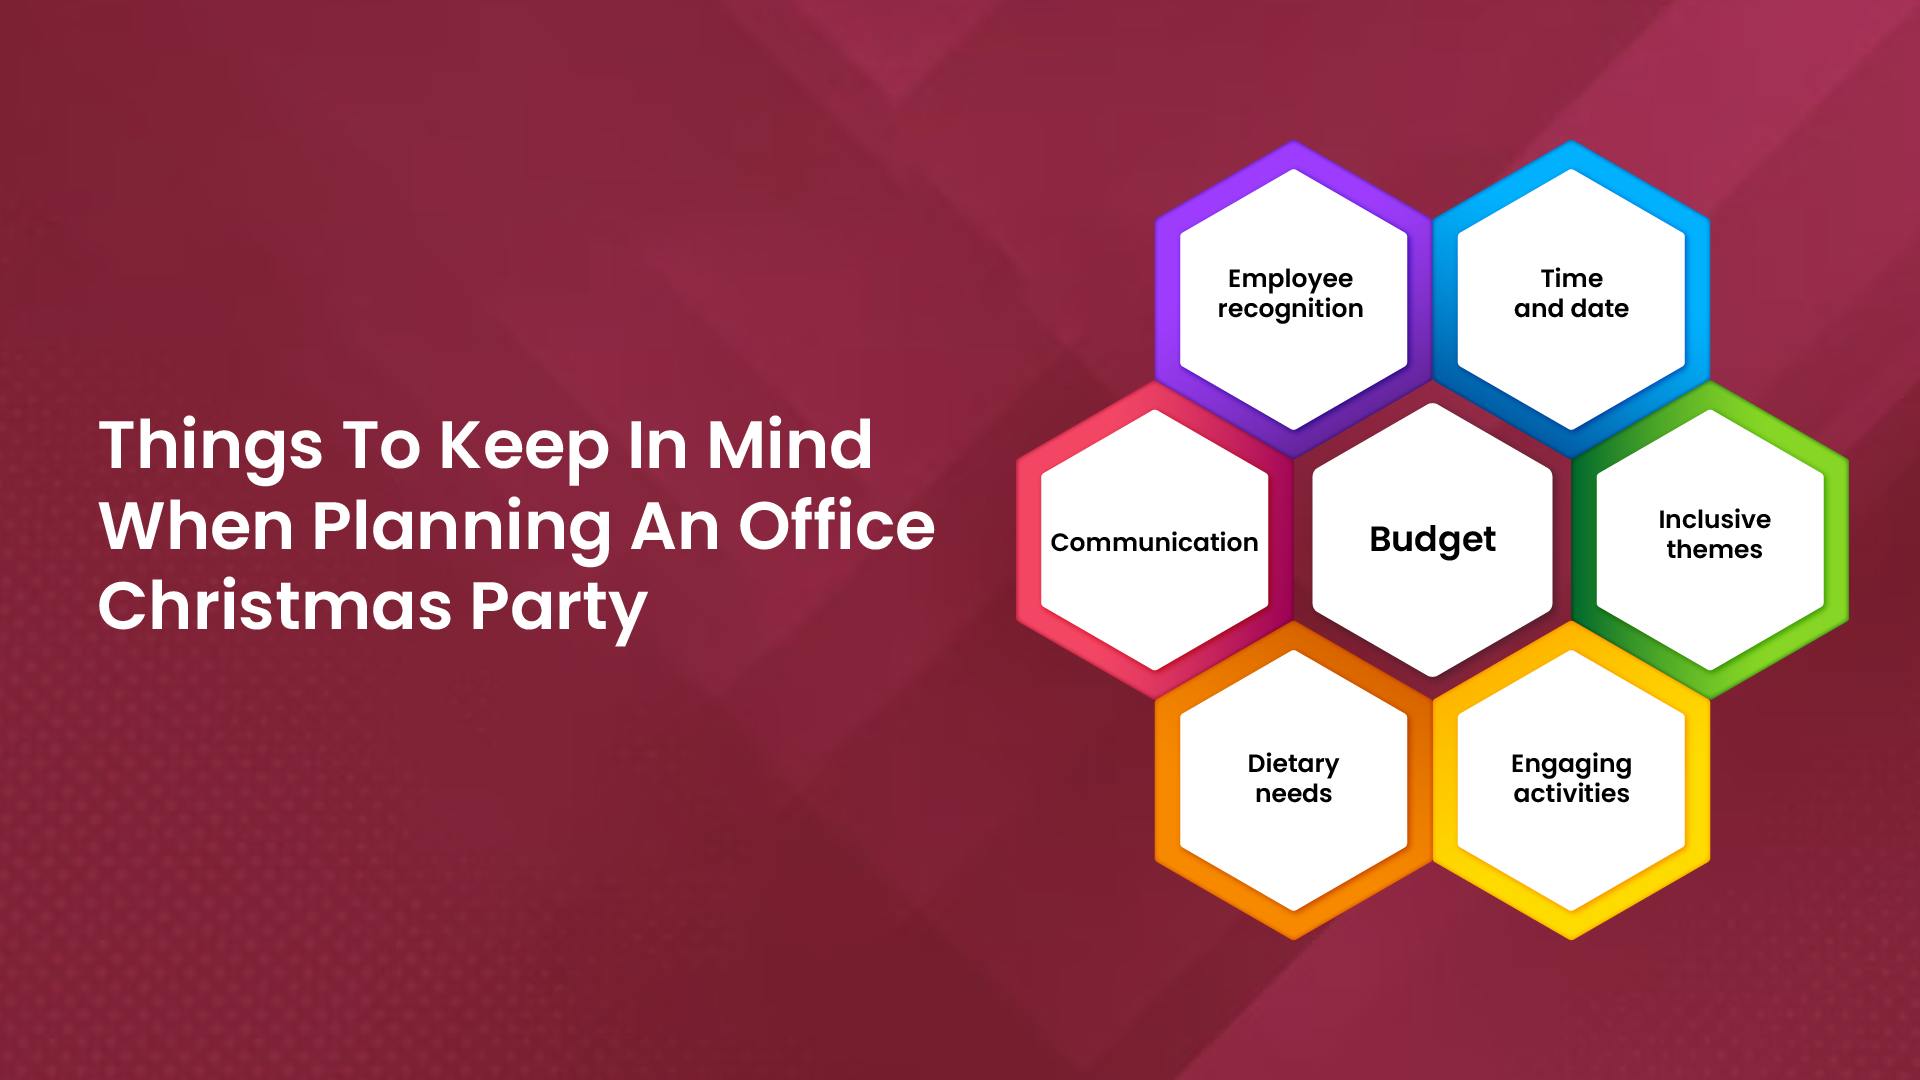 Things to keep in mind when planning an office Christmas party